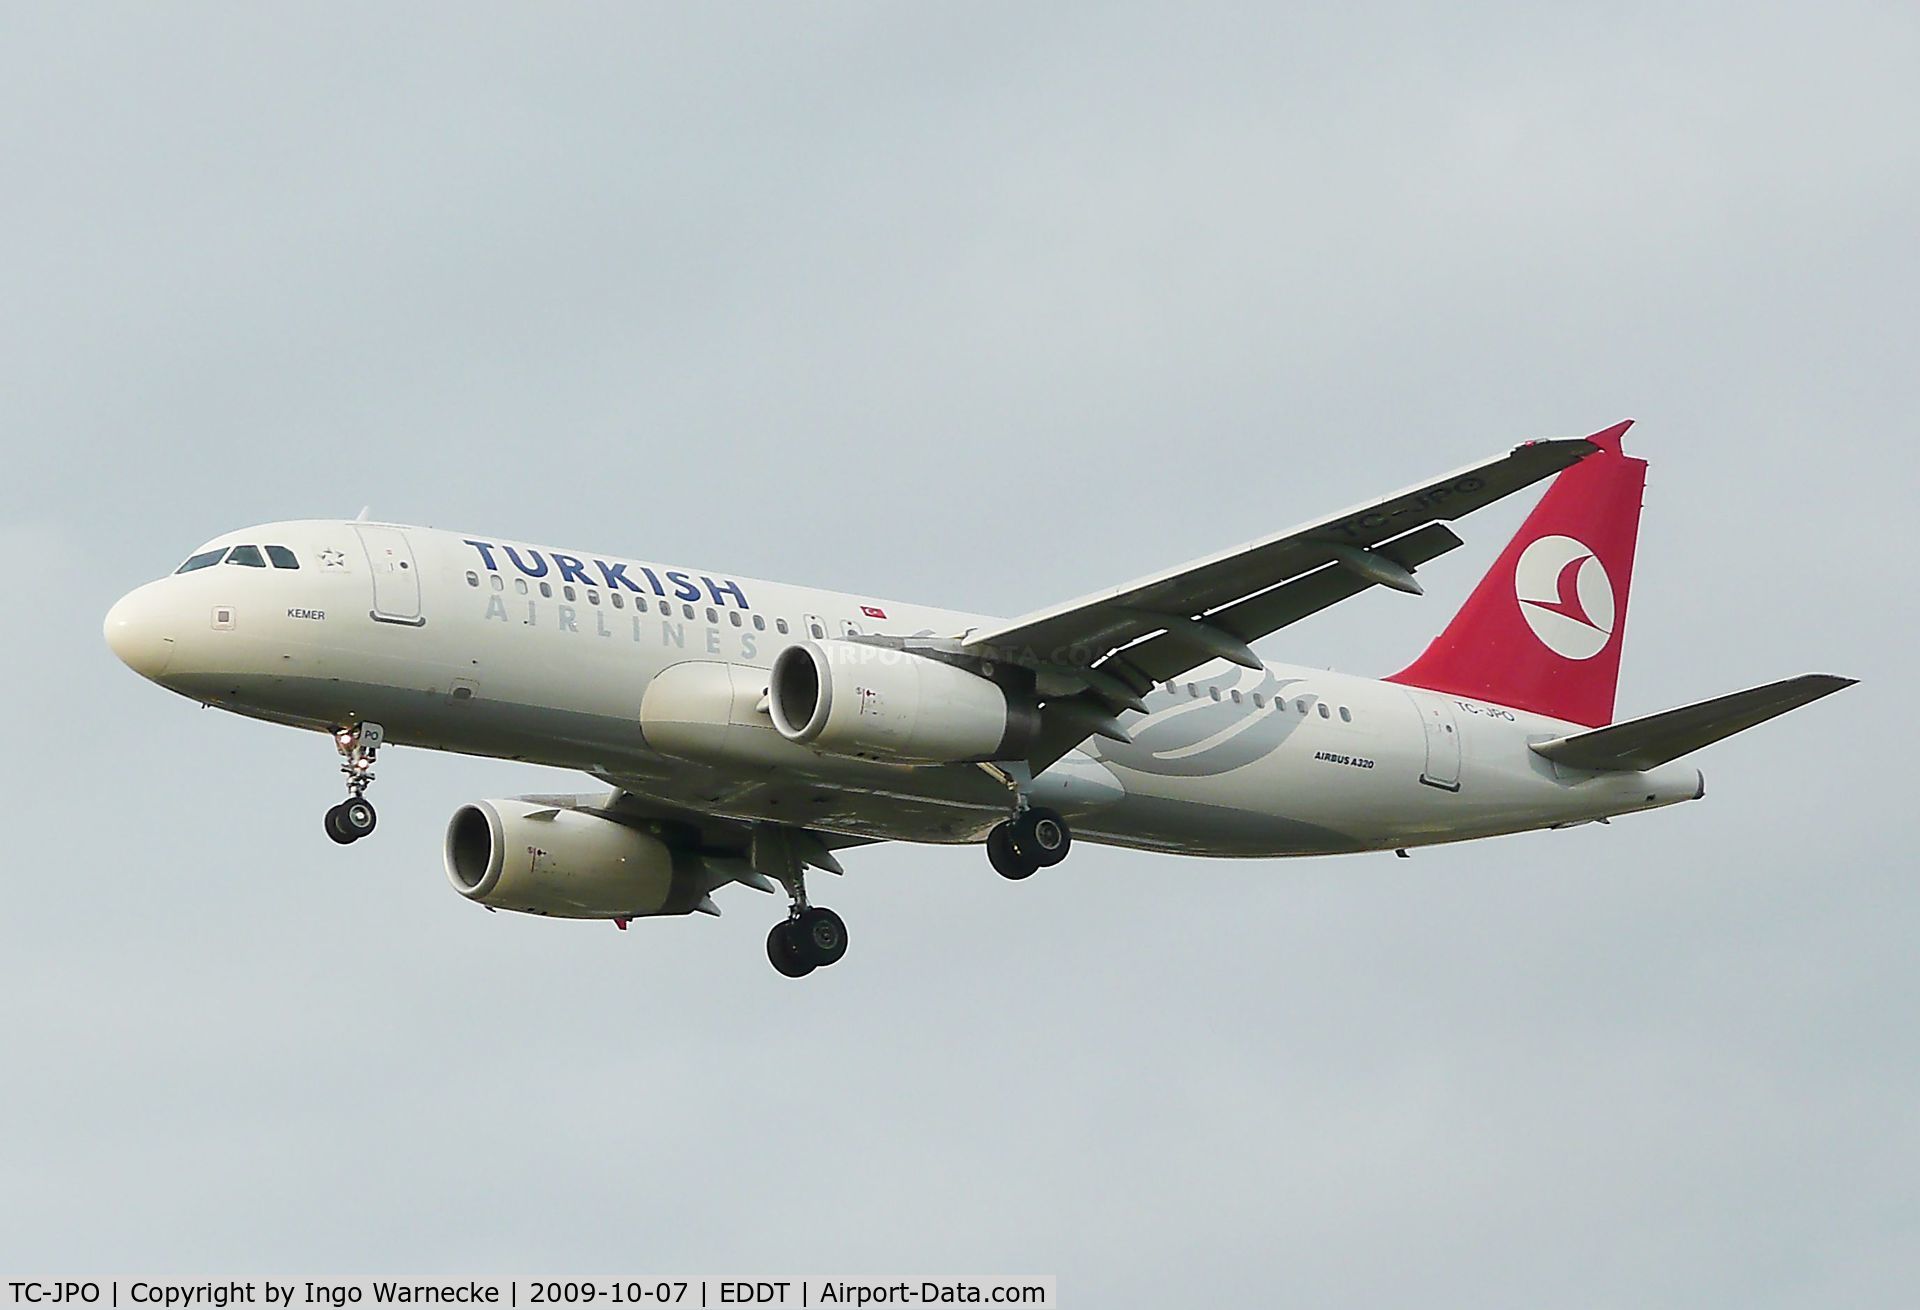 TC-JPO, 2008 Airbus A320-232 C/N 3567, Airbus A320-232 of THY Turkish Airlines on final approach into Tegel airport